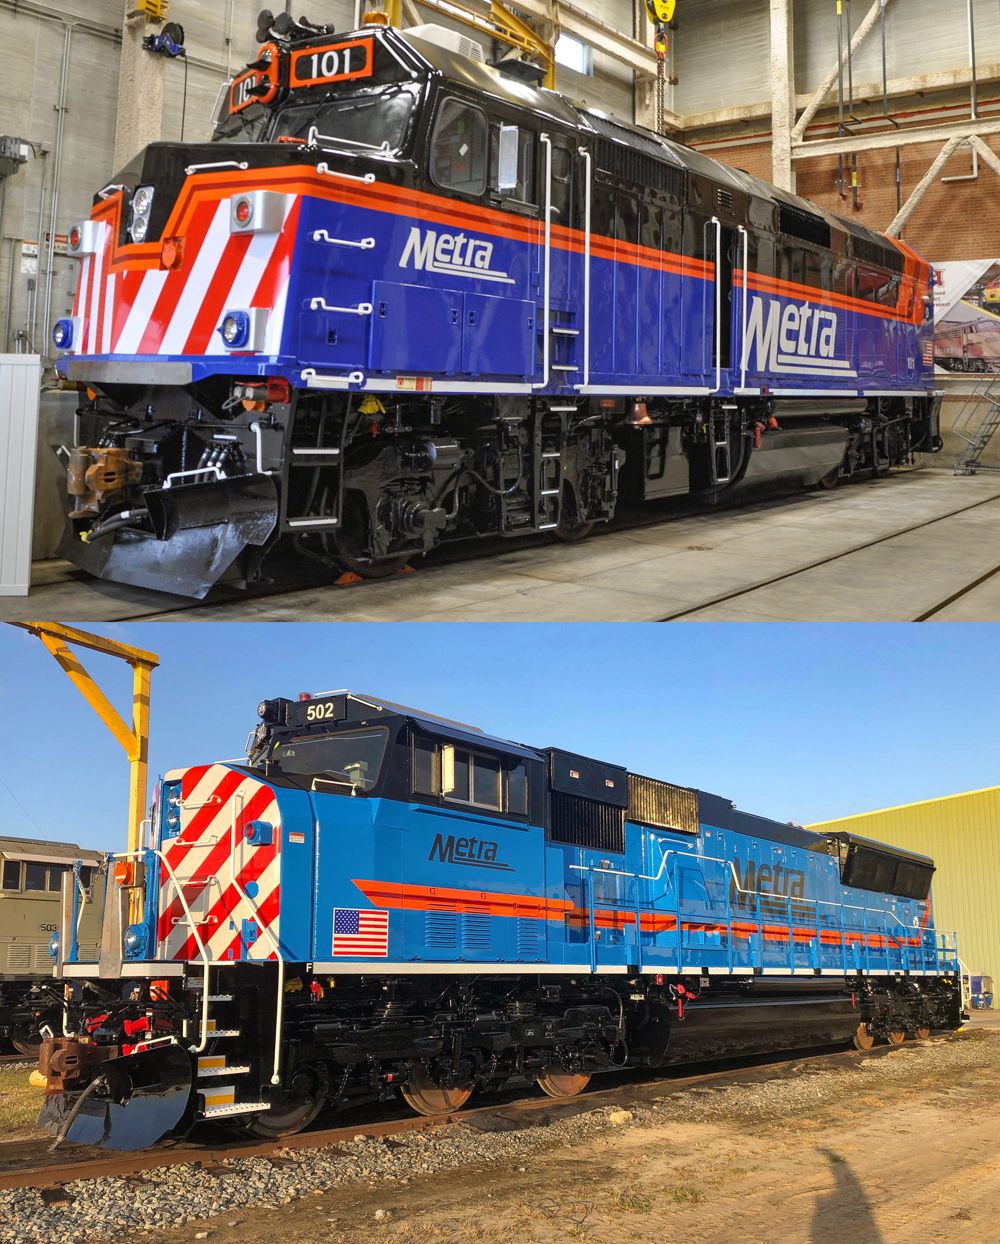 two Metra paint schemes